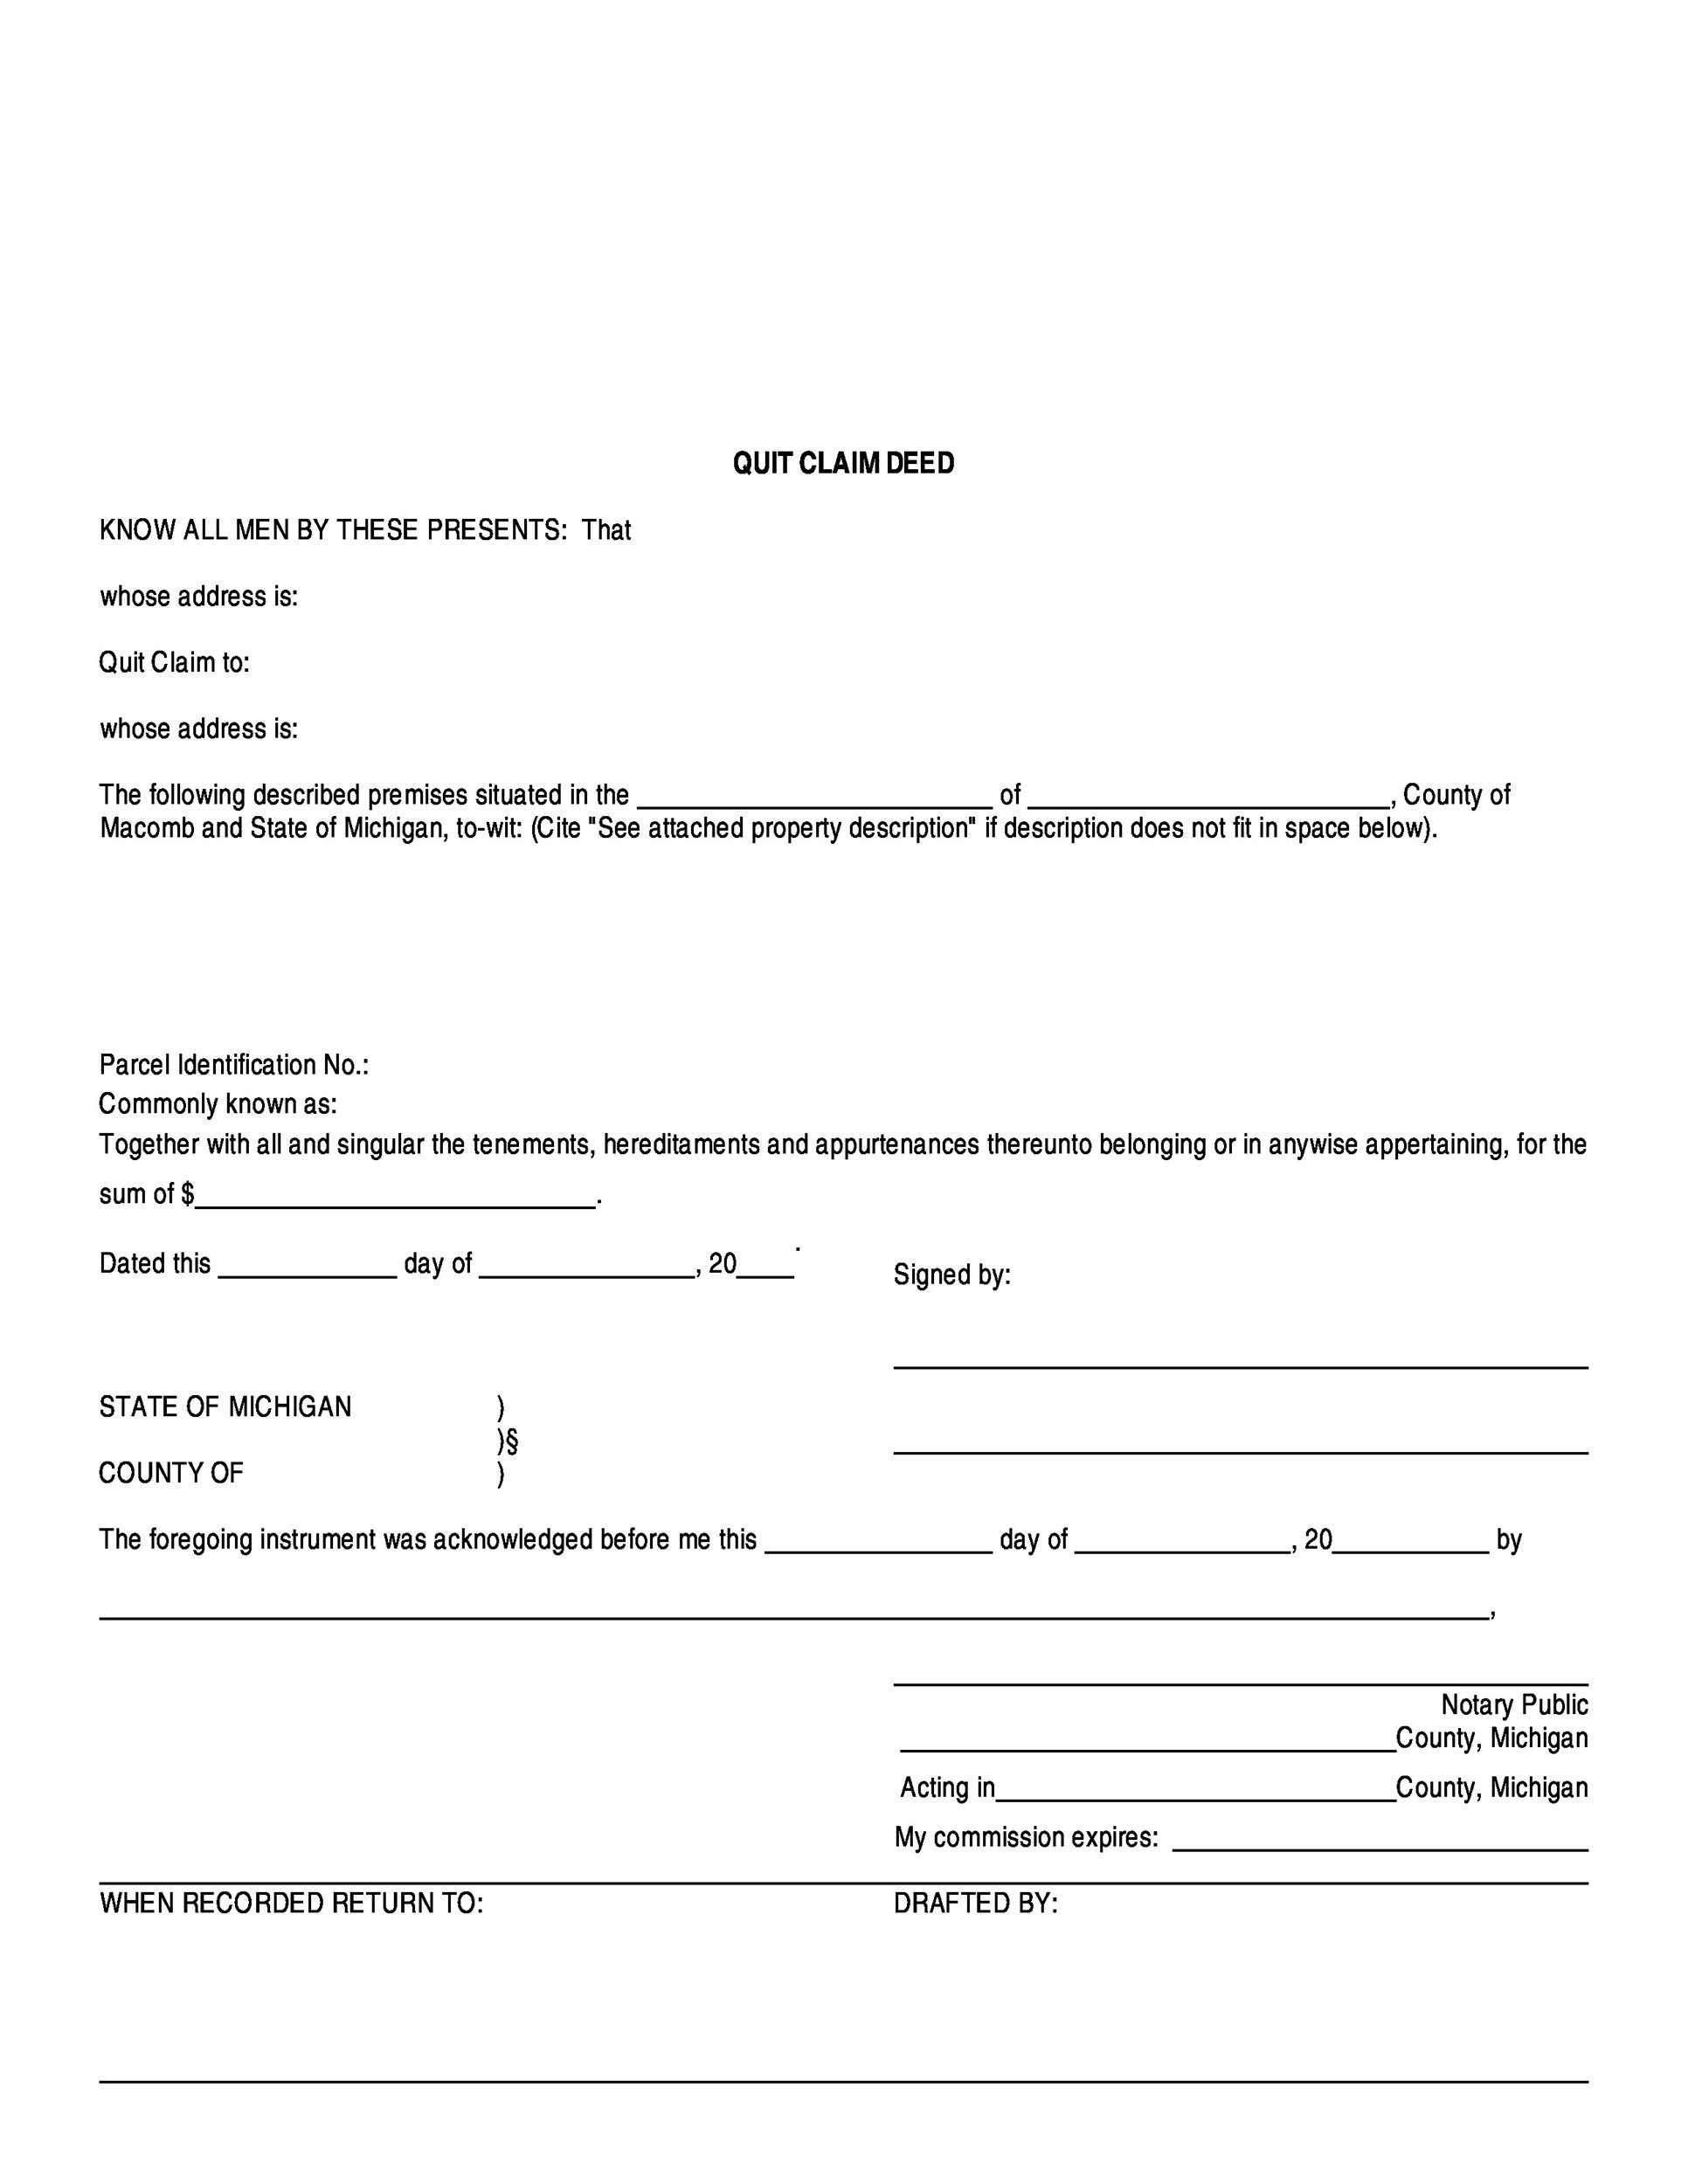 how-to-fill-out-quit-claim-deed-oklahoma-printable-form-templates